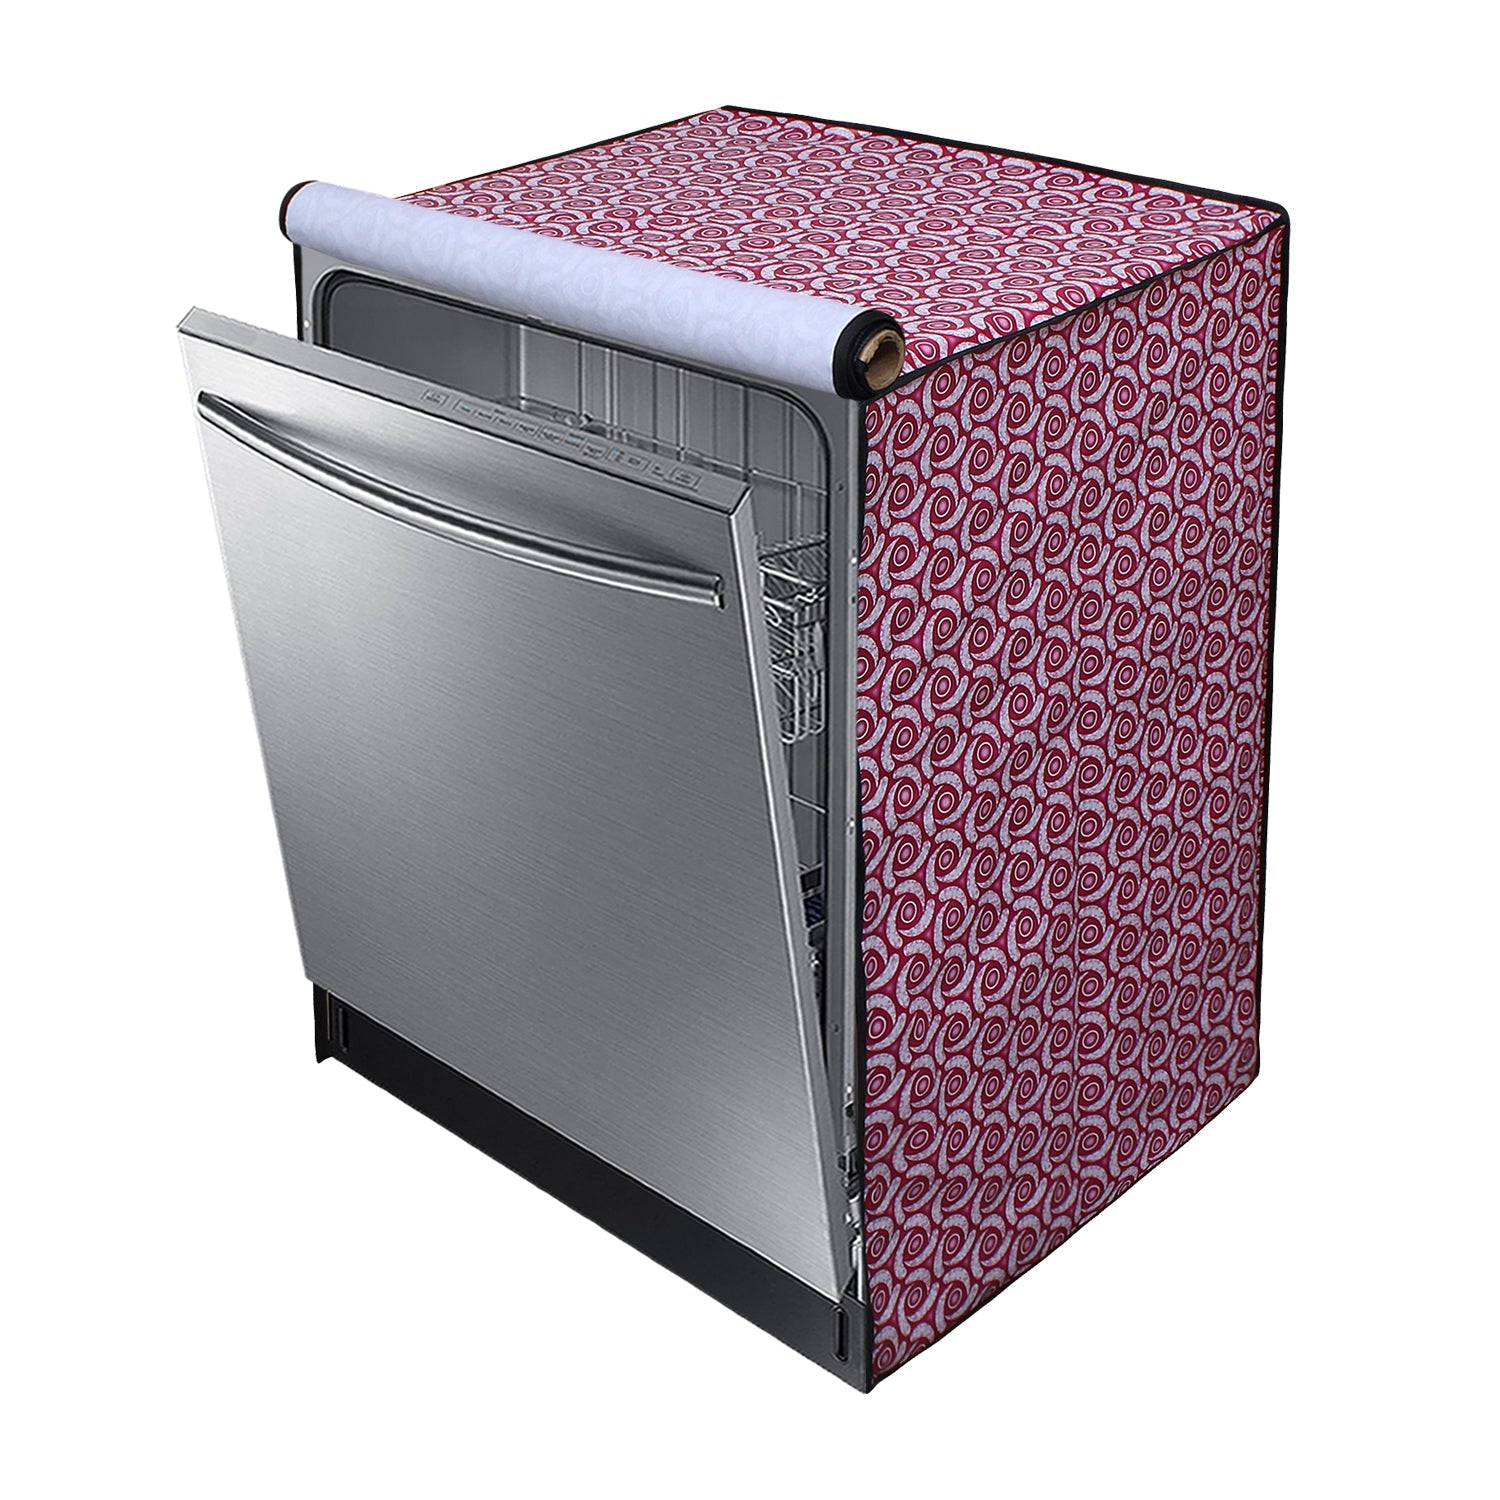 Waterproof and Dustproof Dishwasher Cover, SA57 - Dream Care Furnishings Private Limited